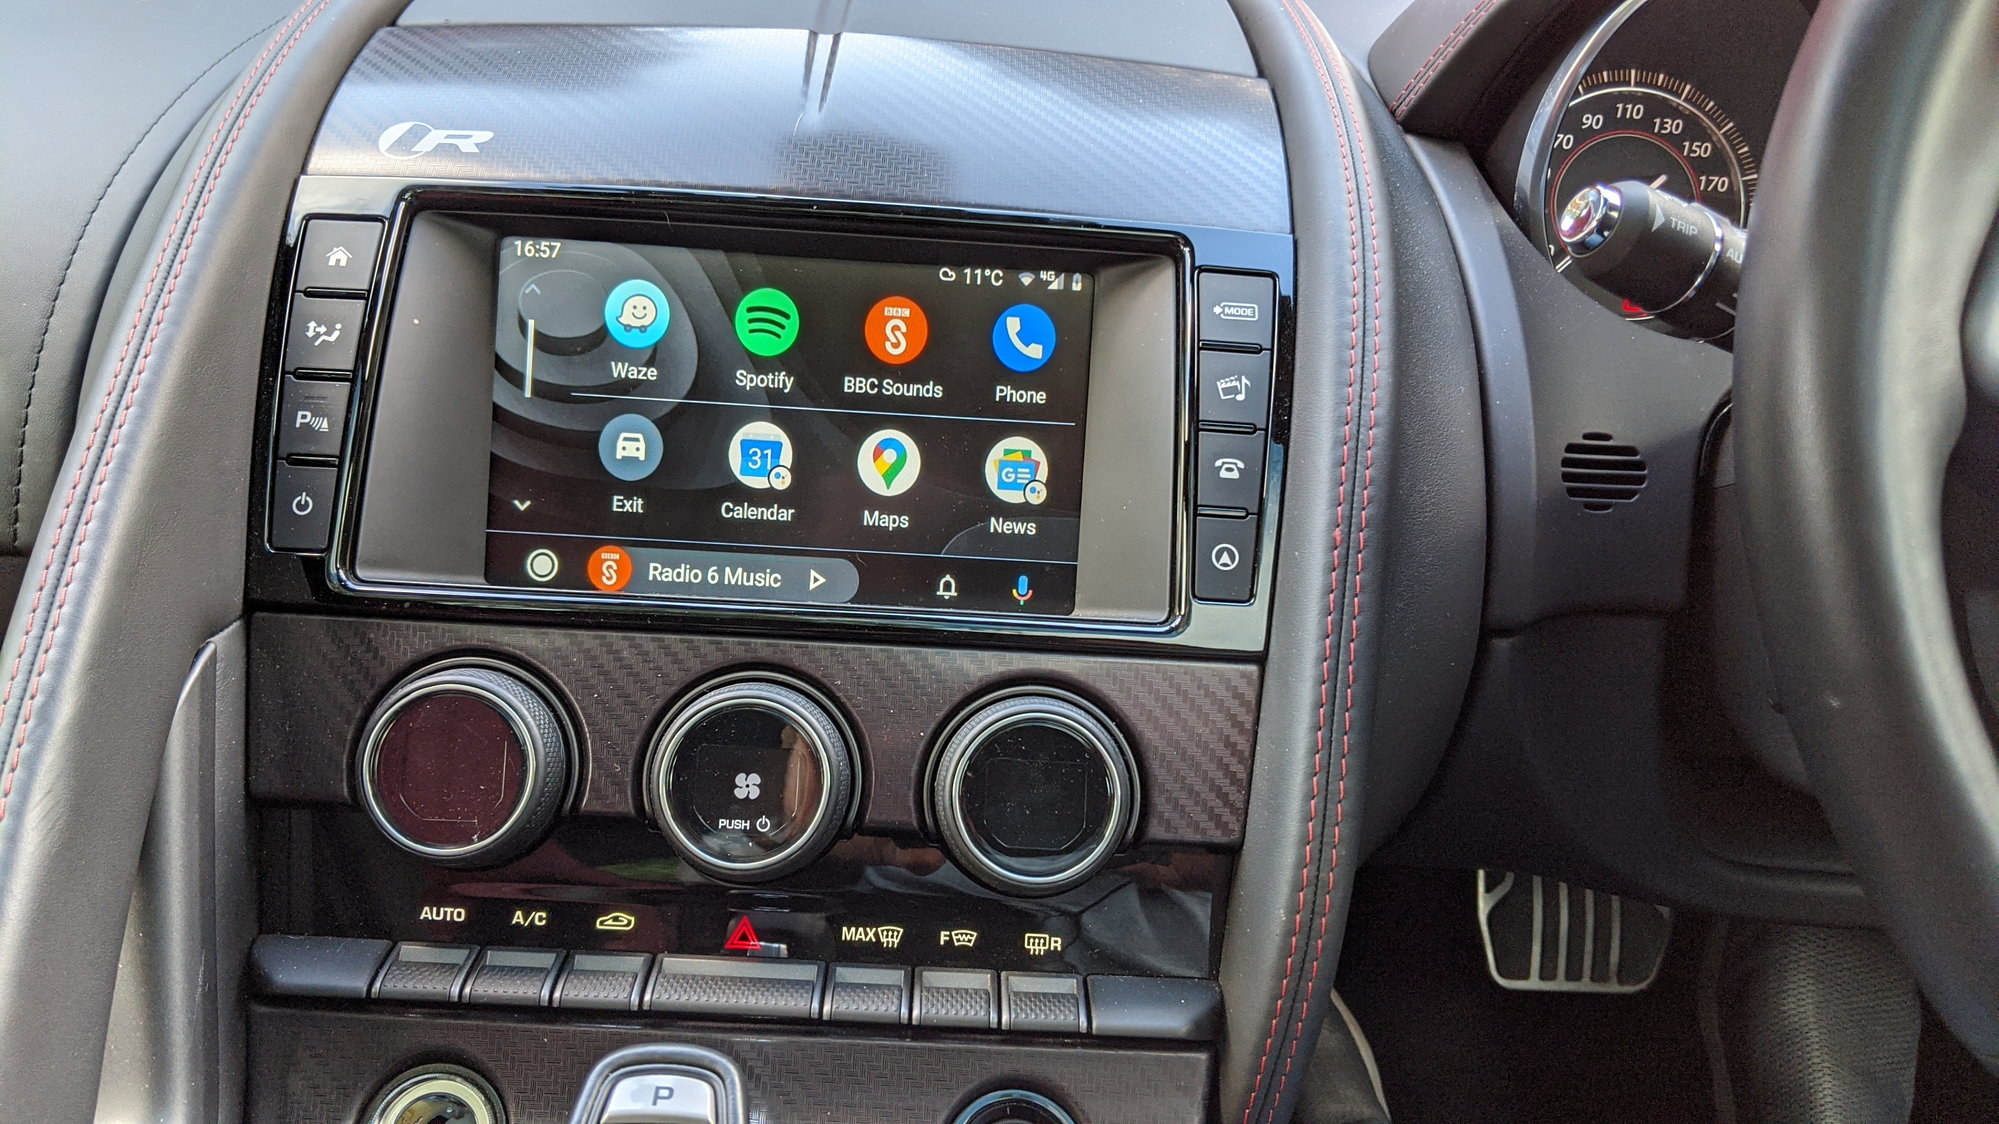 F-Type Stereo System Upgrade Planning - Page 11 - Jaguar Forums